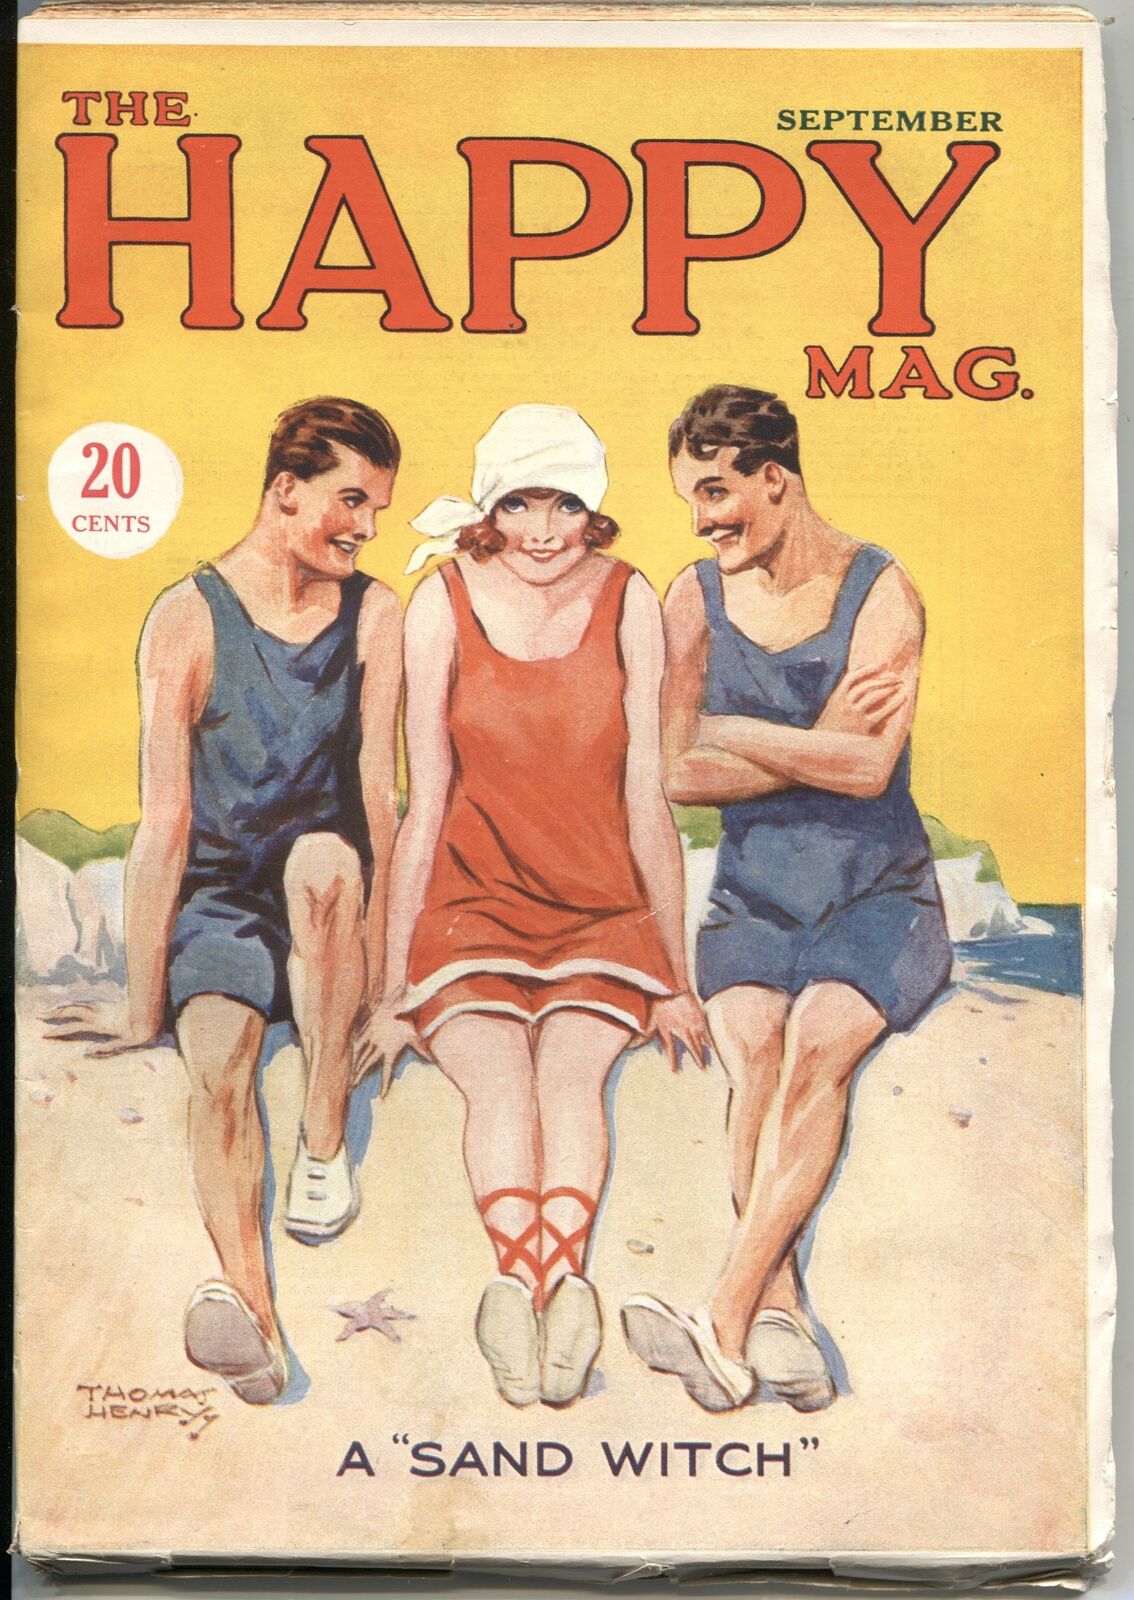 HAPPY MAG #1--SEPT 1927-SPICY “SAND WITCH” COVER ART-VERY RARE PULP MAGAZINE